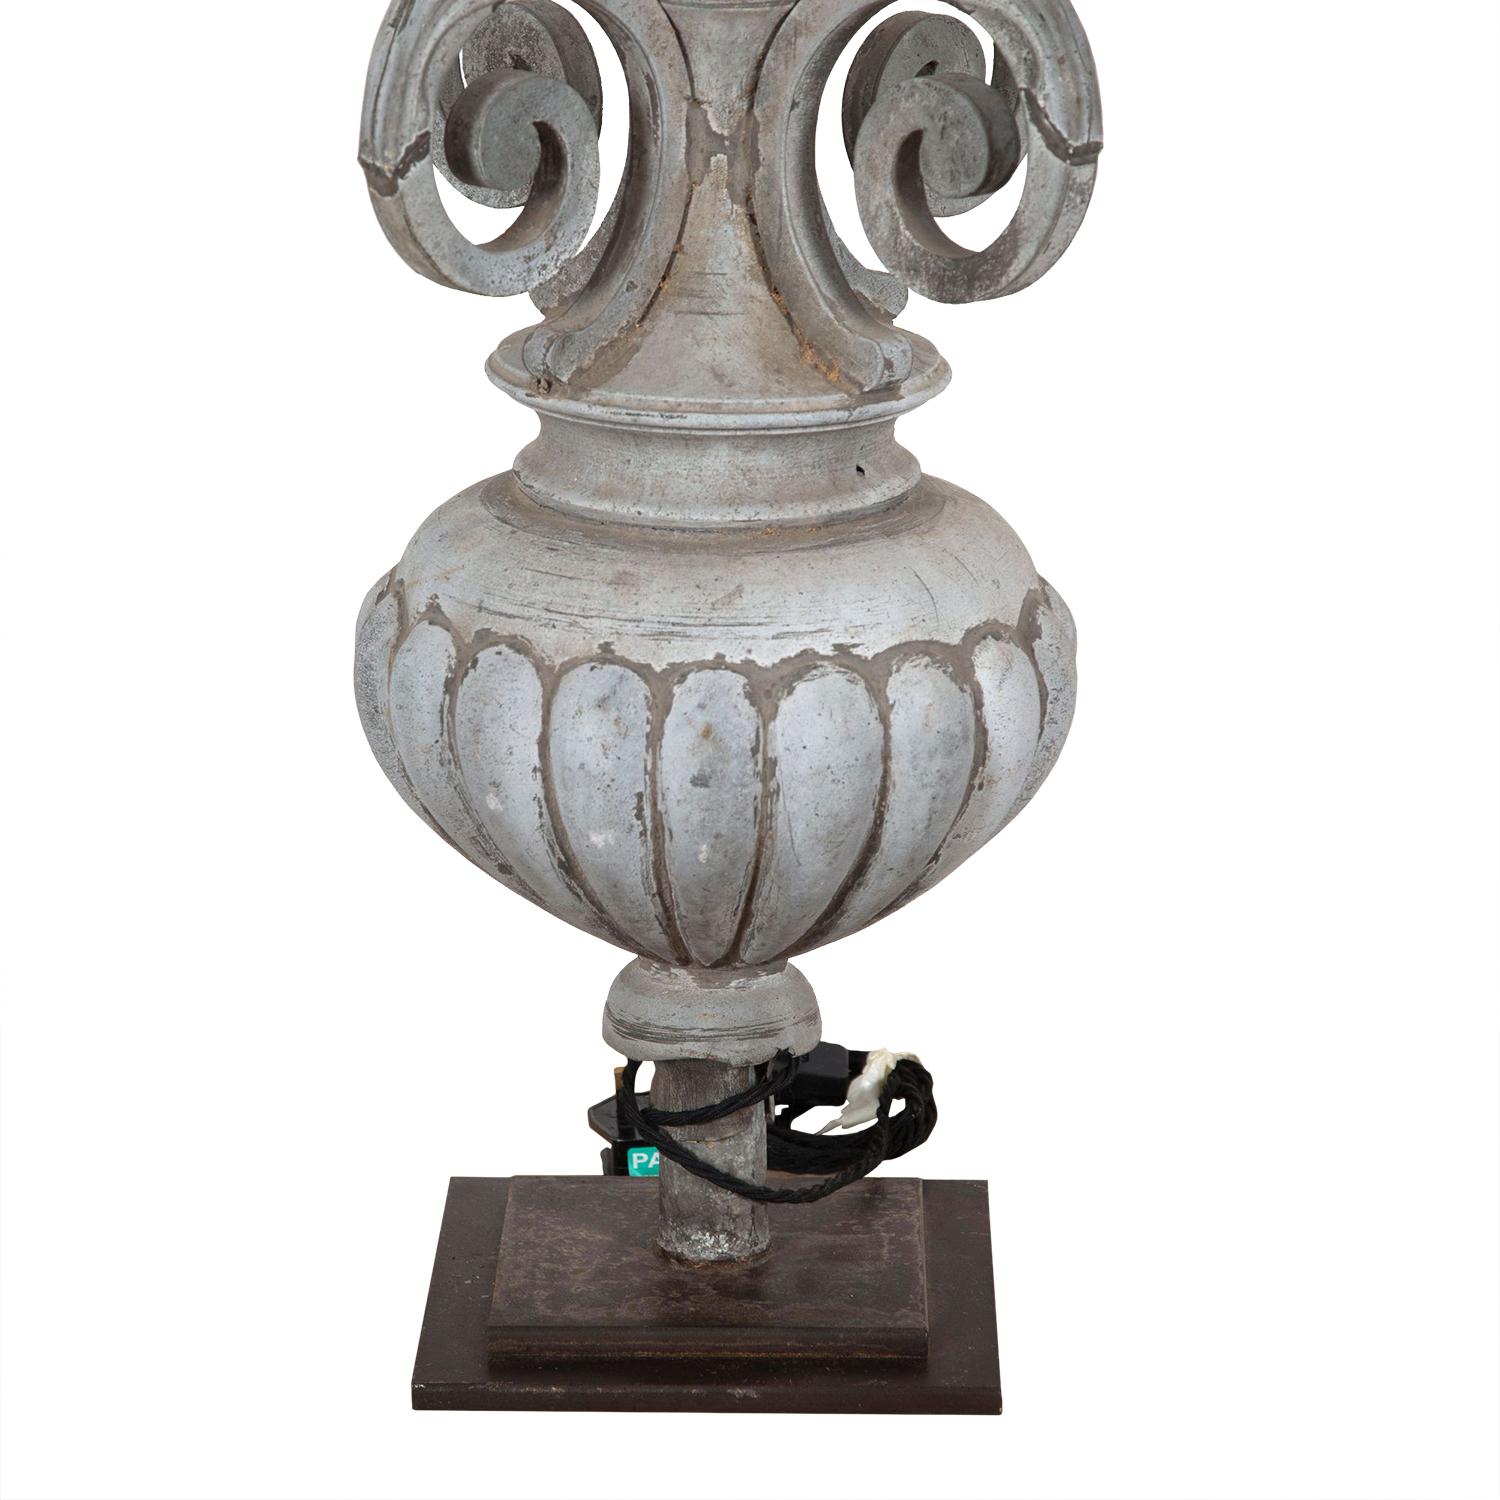 19th century zinc fragment converted into a decorative lamp. This piece has been rewired and PAT tested to UK standards.